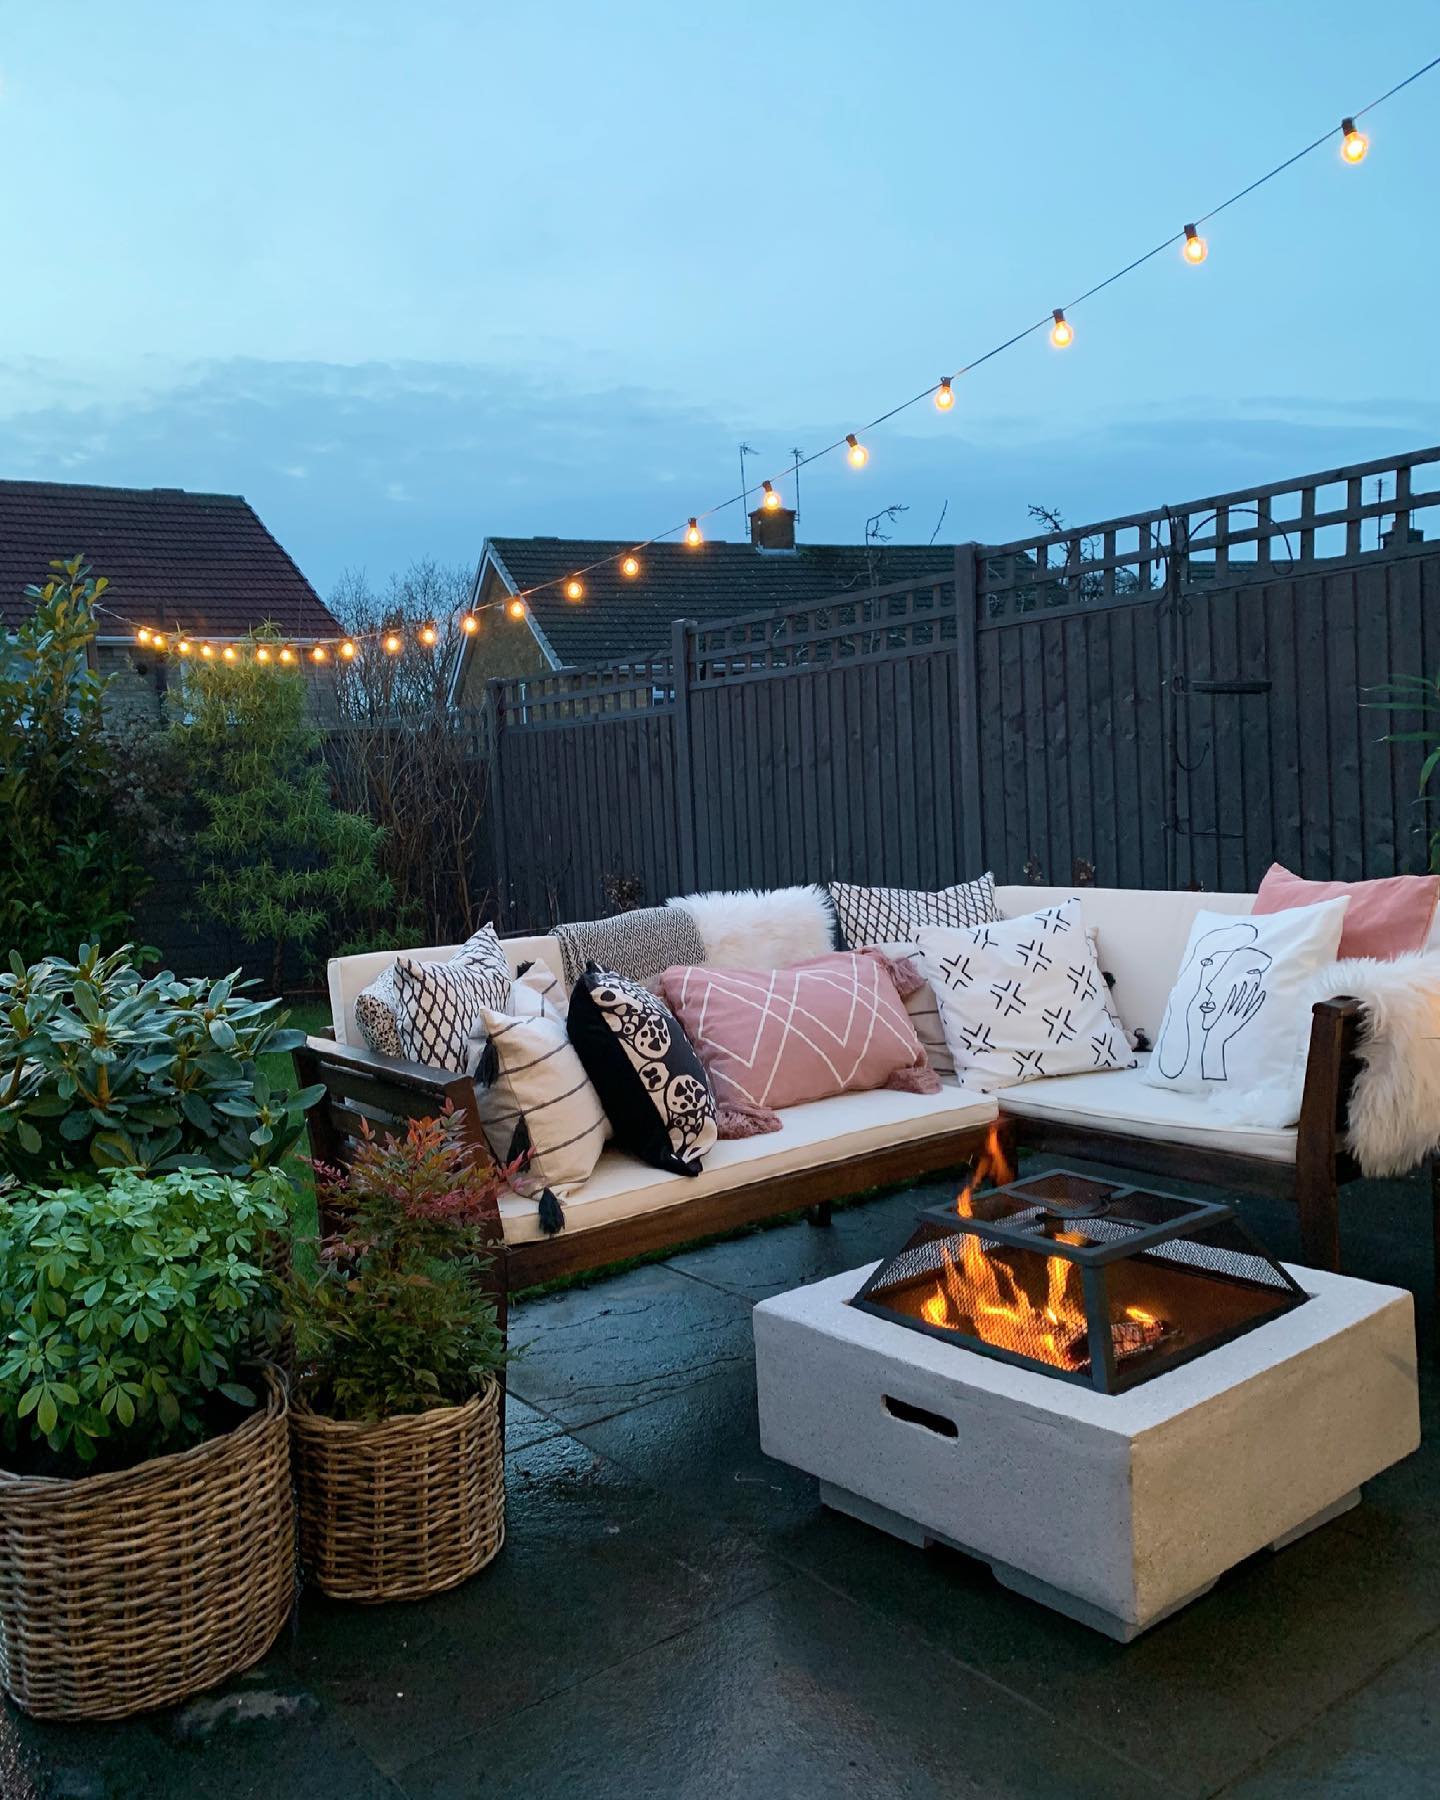 fire pit on outdoor patio with seating and lights at night. Photo by Instagram user @mo.and.the.jungle.shelf